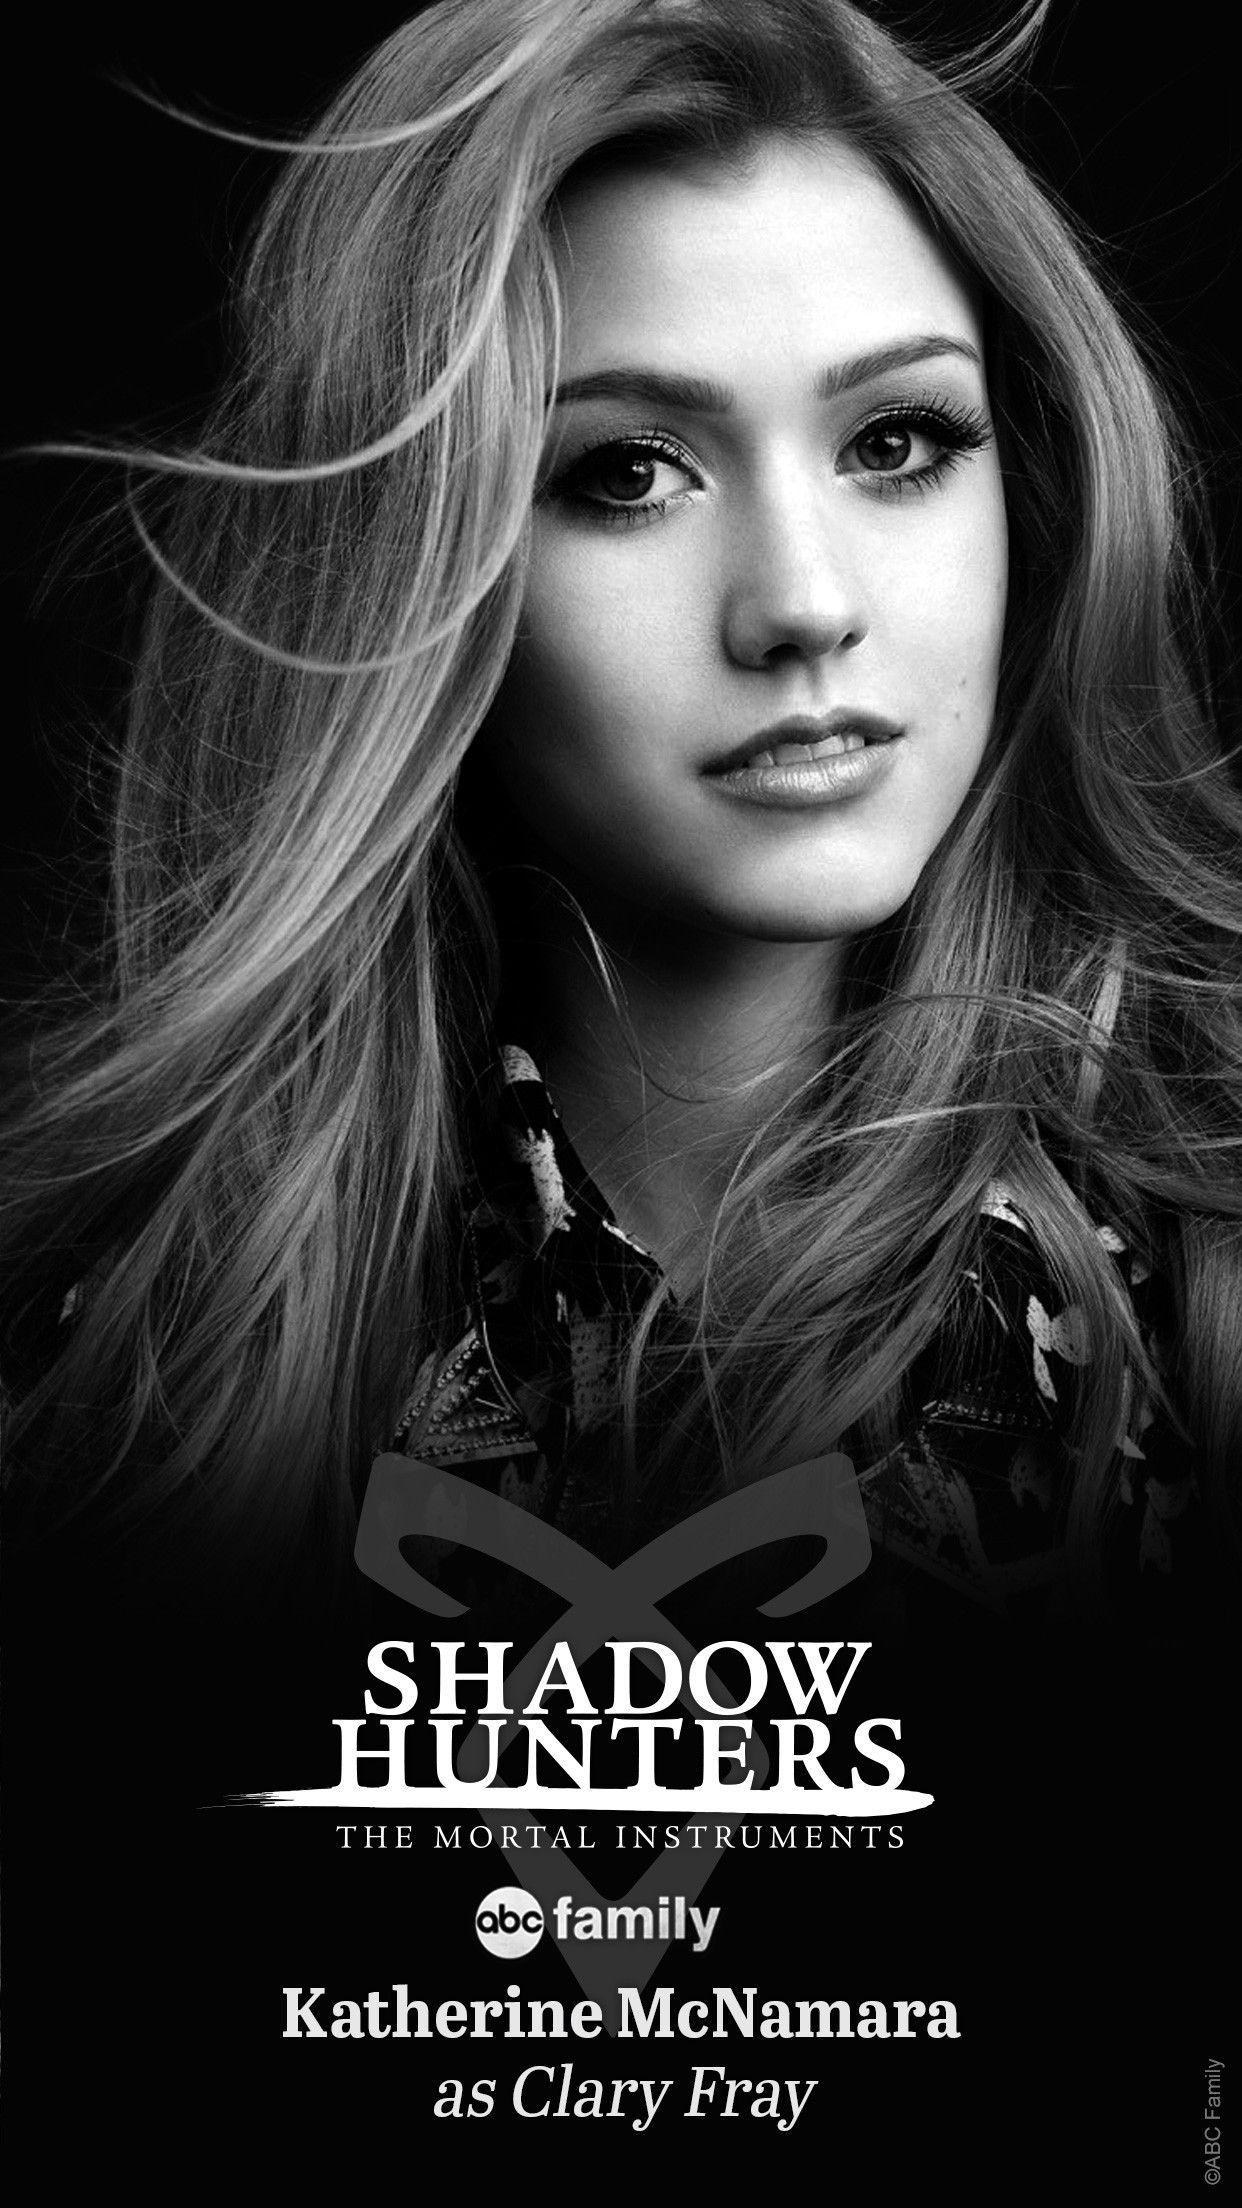 clary fray quotes